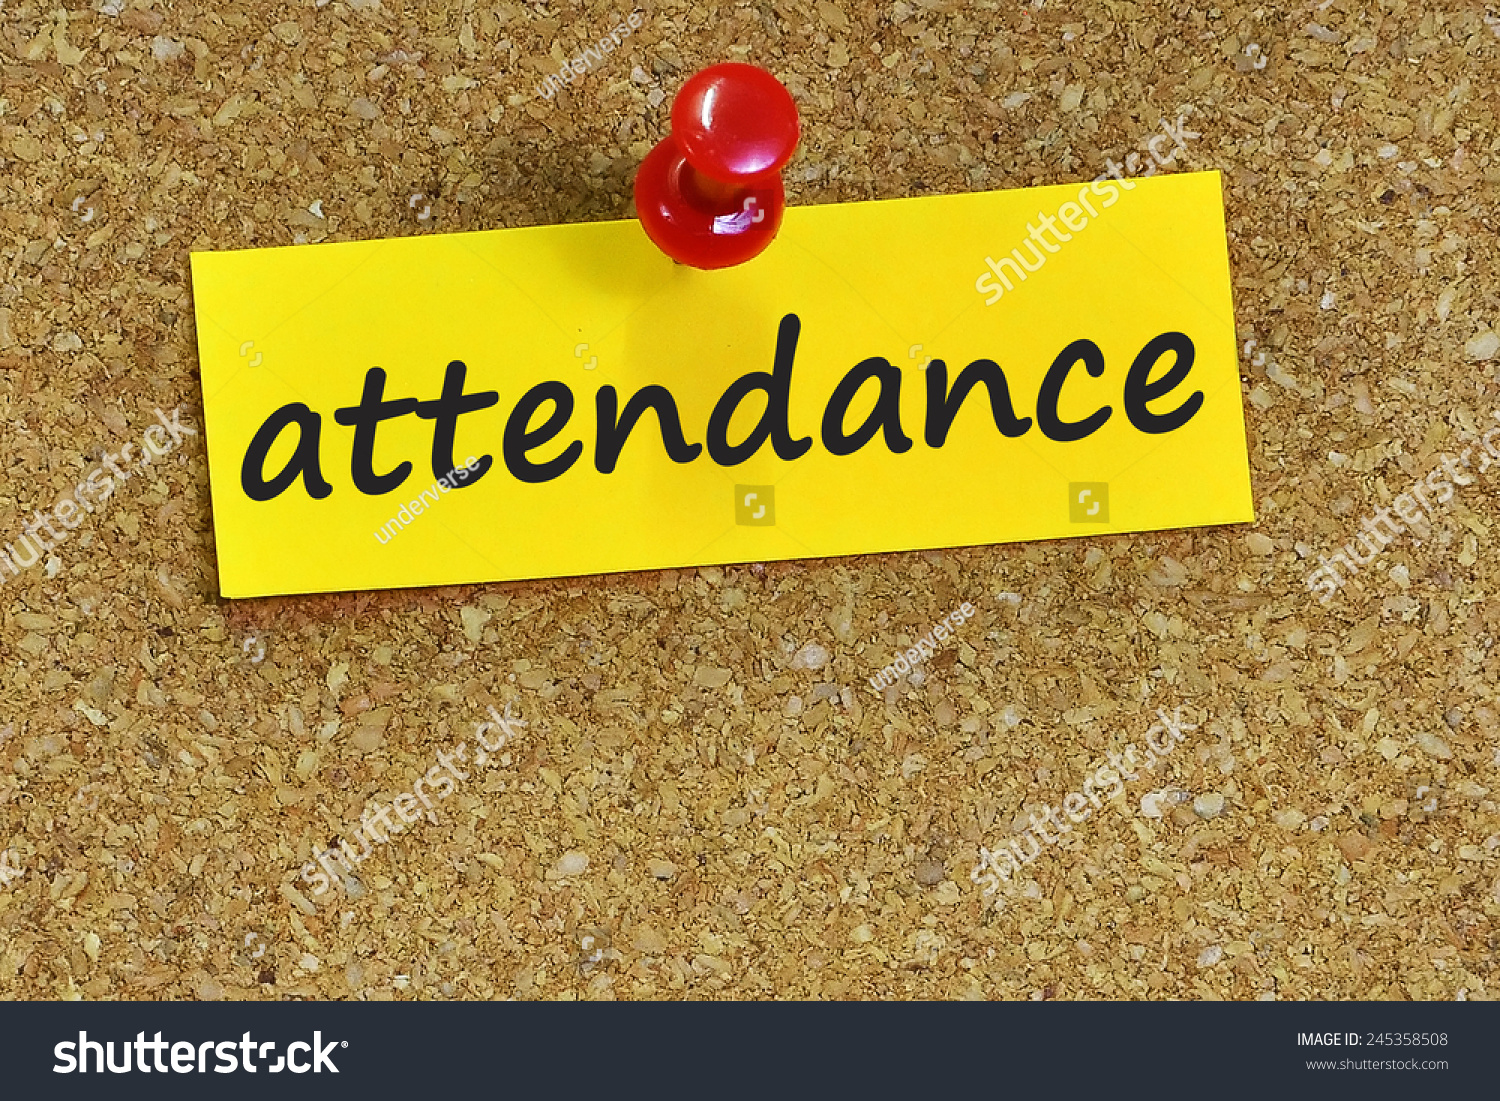 Attendance Word On Notepaper Brown Cork Stock Photo Edit Now